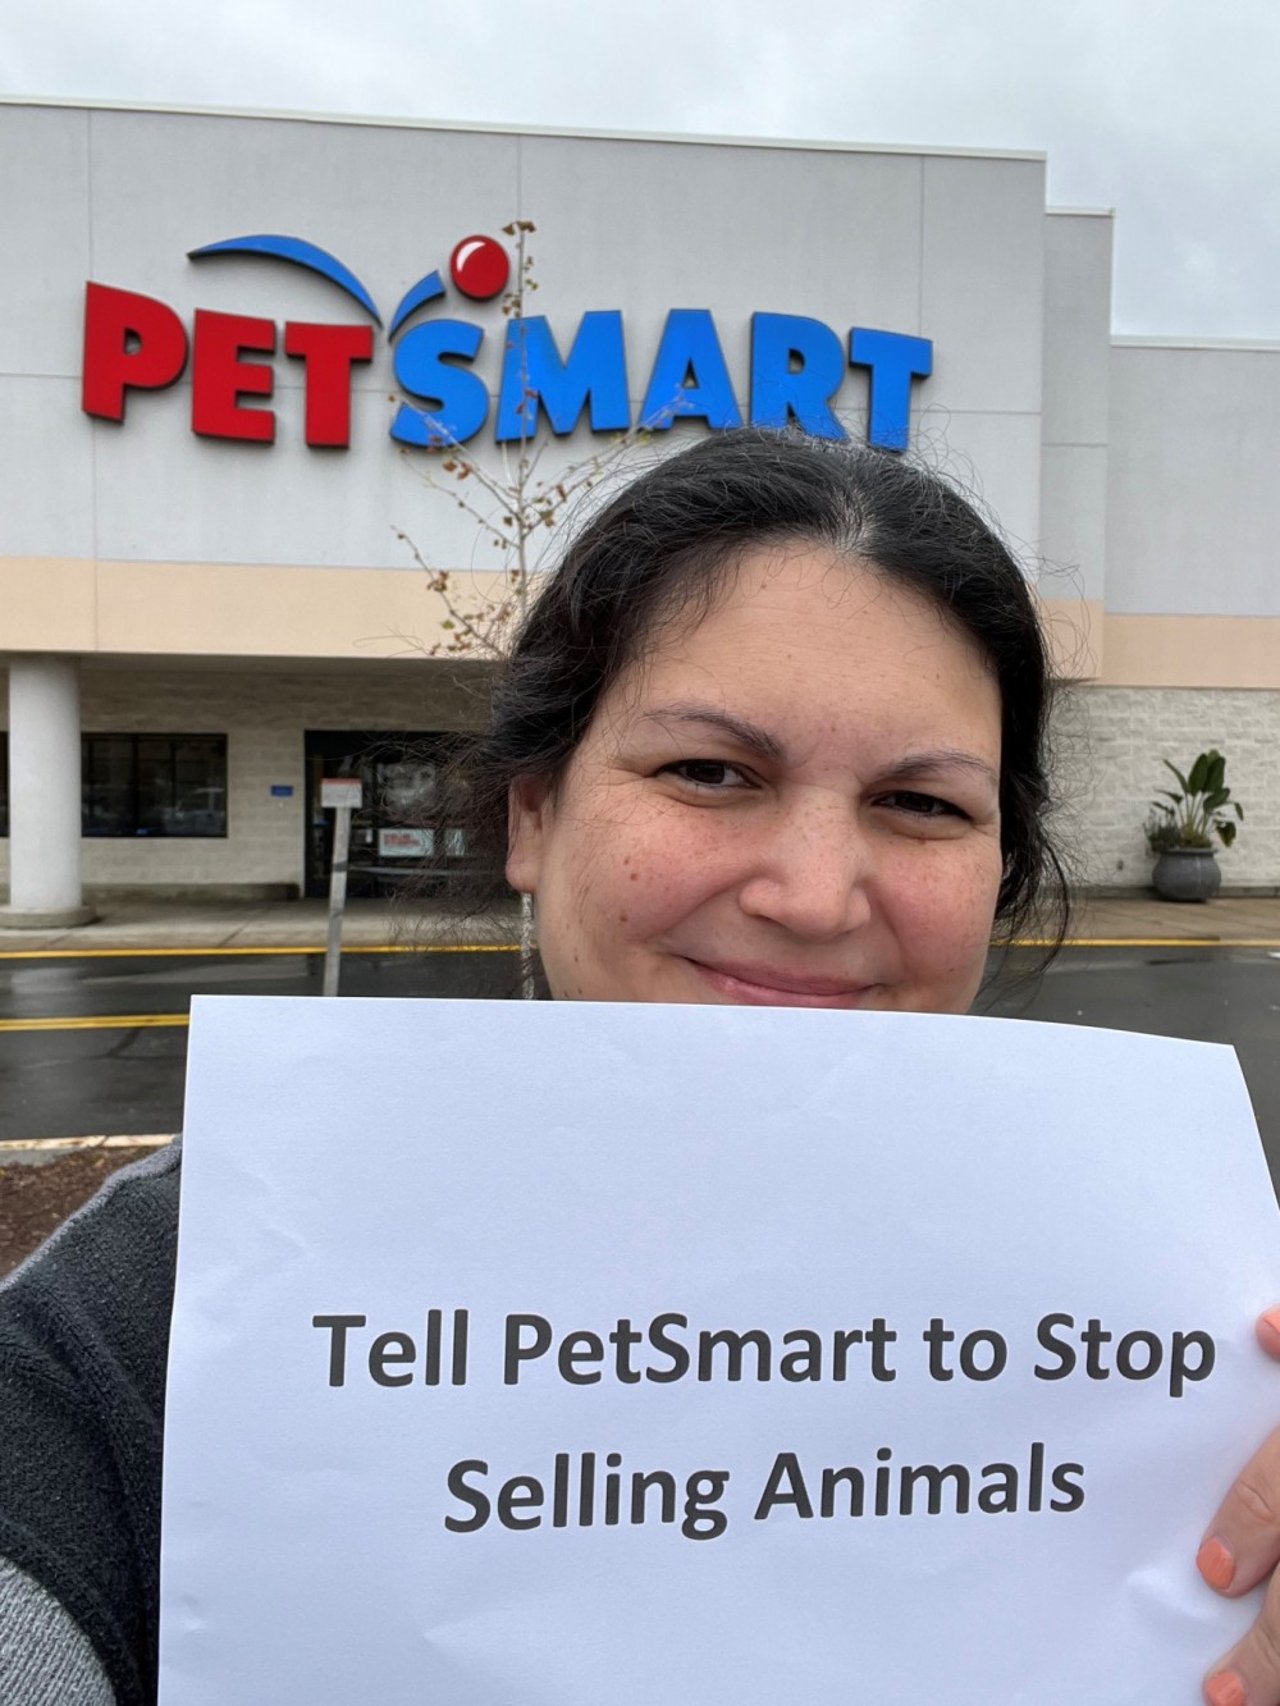 A selfie of liz cabrera holtz in front of a PetSmart store with her sign